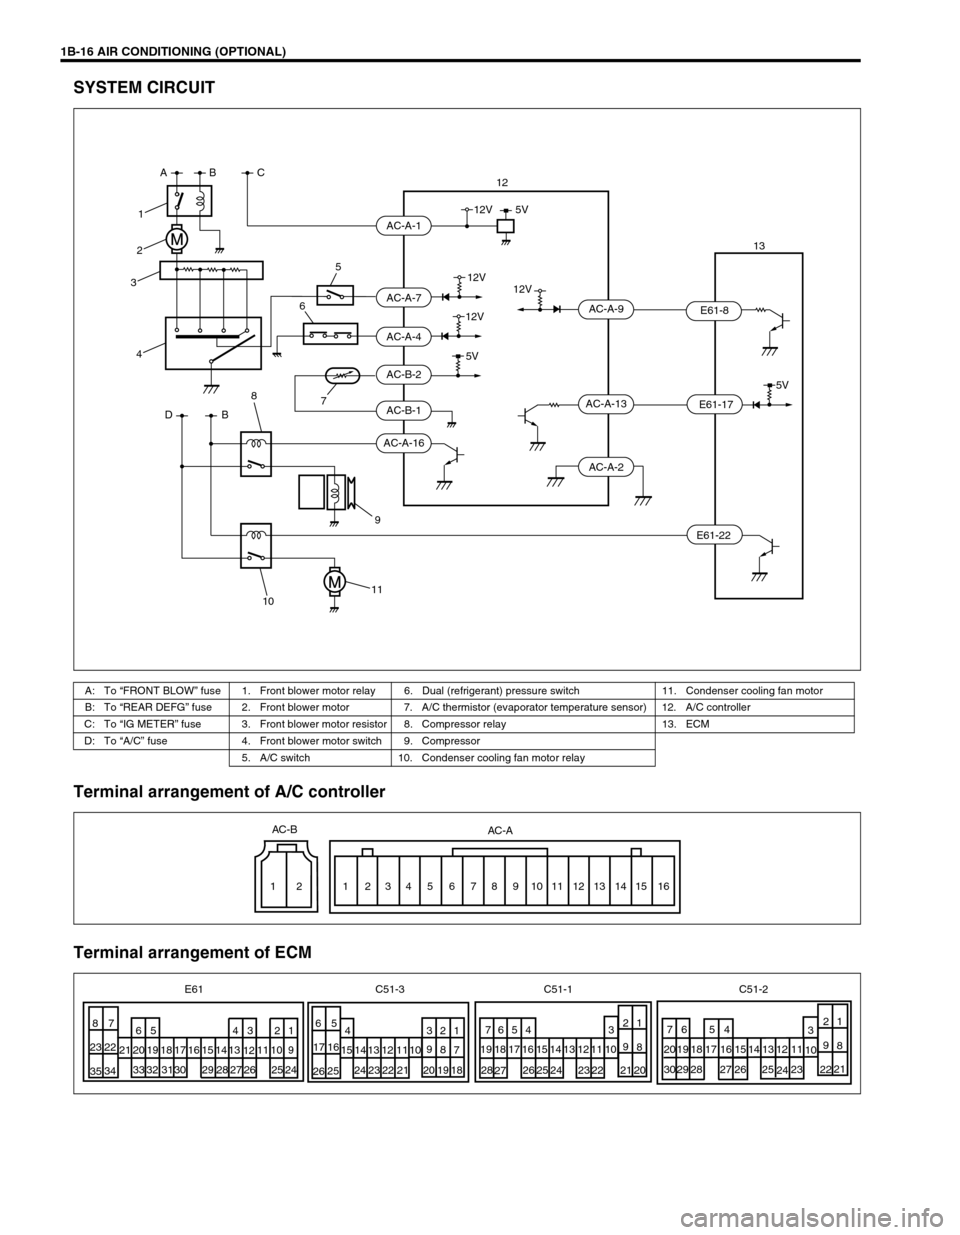 SUZUKI GRAND VITARA 1999 2.G Service Manual 1B-16 AIR CONDITIONING (OPTIONAL)
SYSTEM CIRCUIT
Terminal arrangement of A/C controller
Terminal arrangement of ECM
A: To “FRONT BLOW” fuse 1. Front blower motor relay 6. Dual (refrigerant) pressu